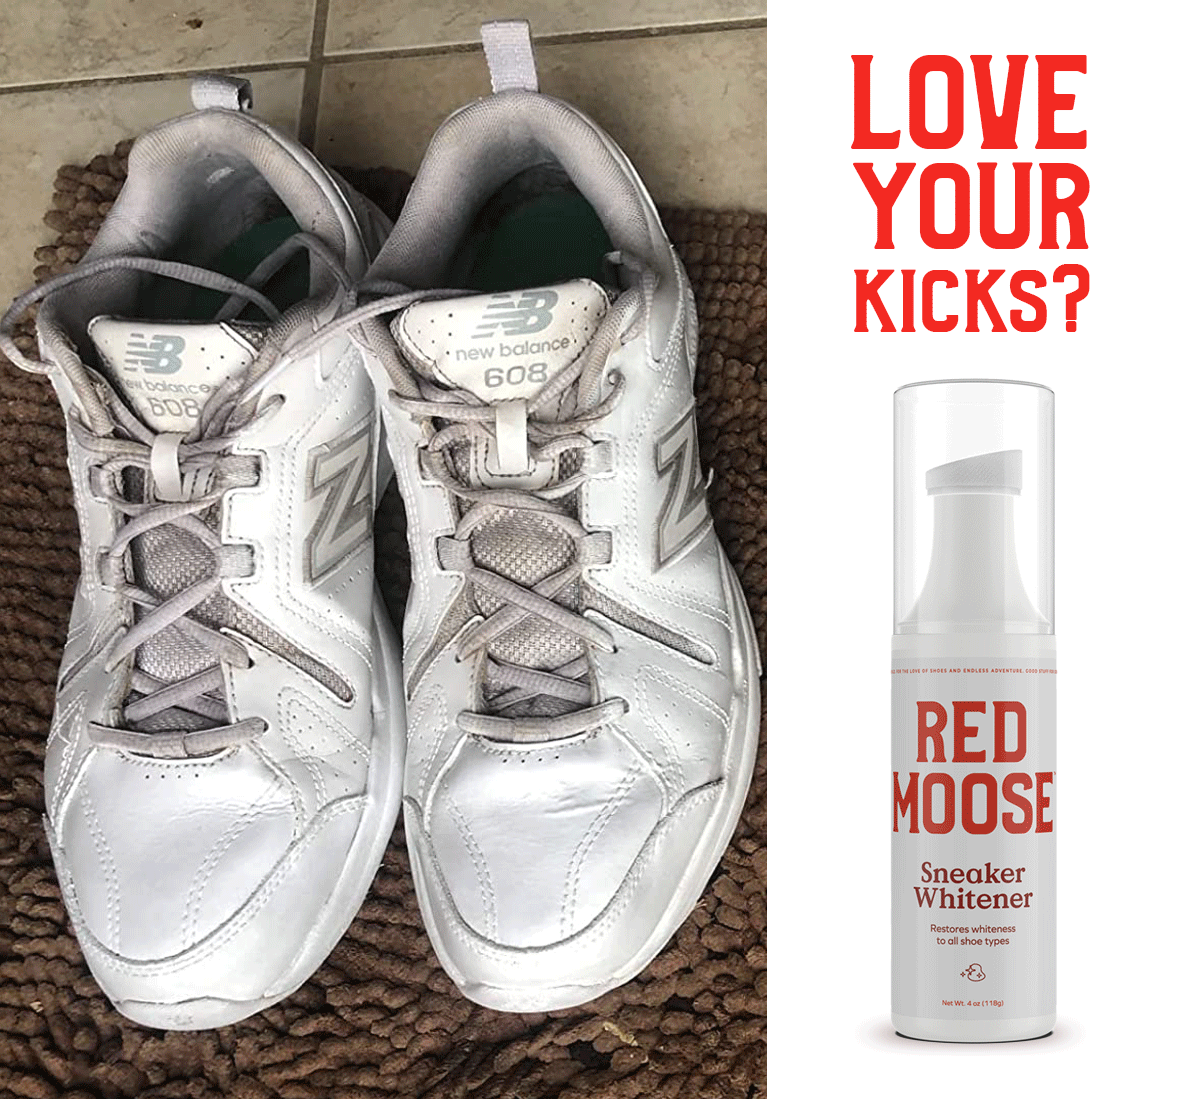 Video Review of #RED MOOSE Shoe and Sneaker Whitener by Avery, 1037 votes